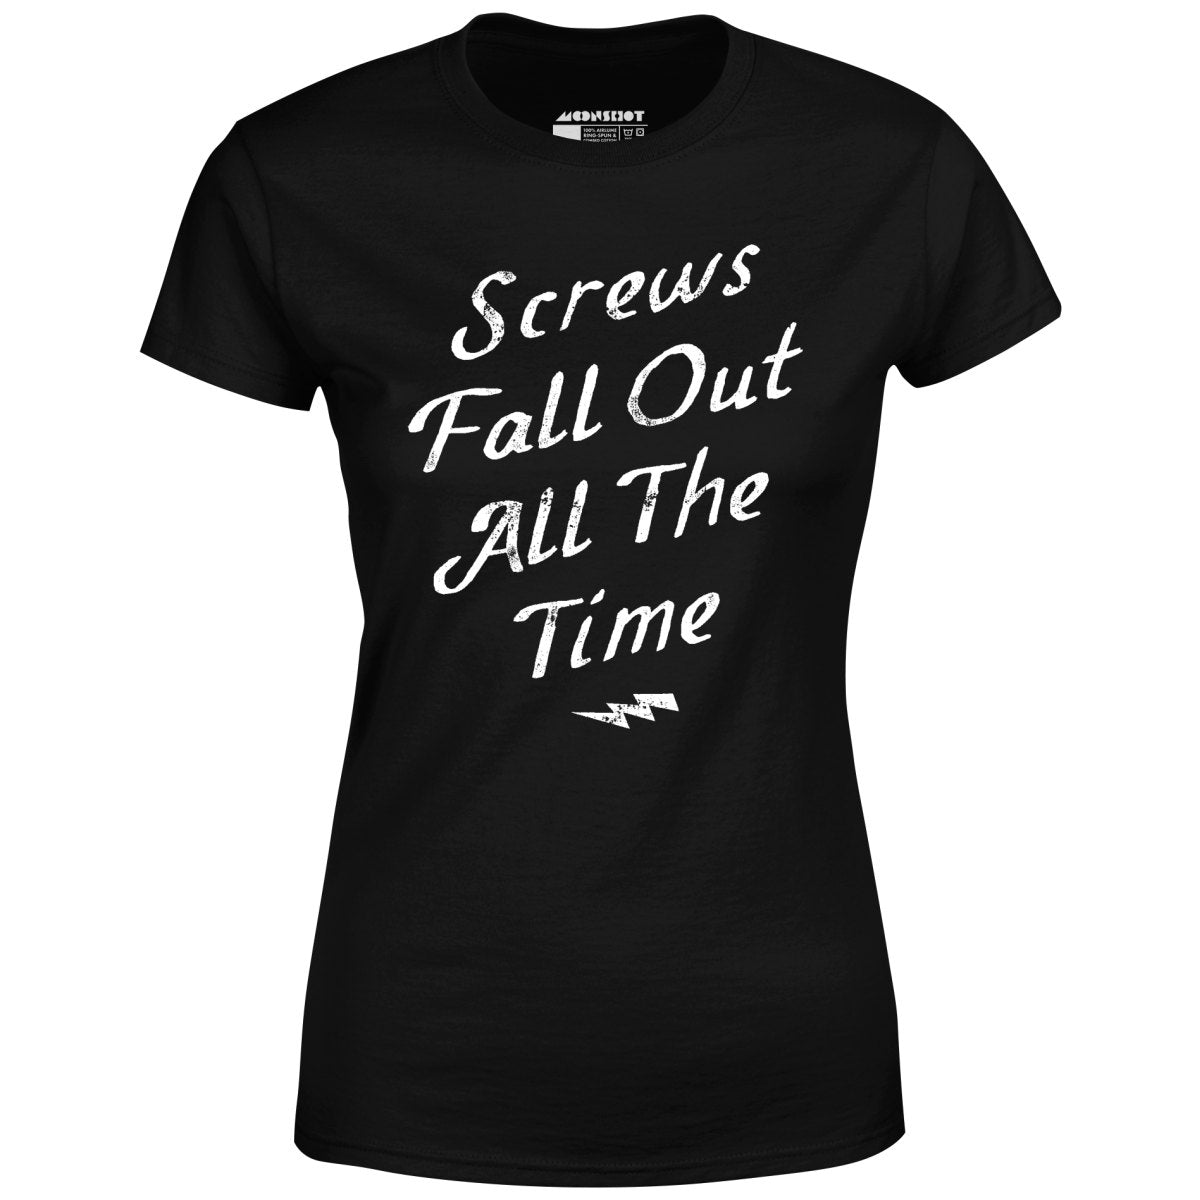 Screws Fall Out All The Time - Women's T-Shirt